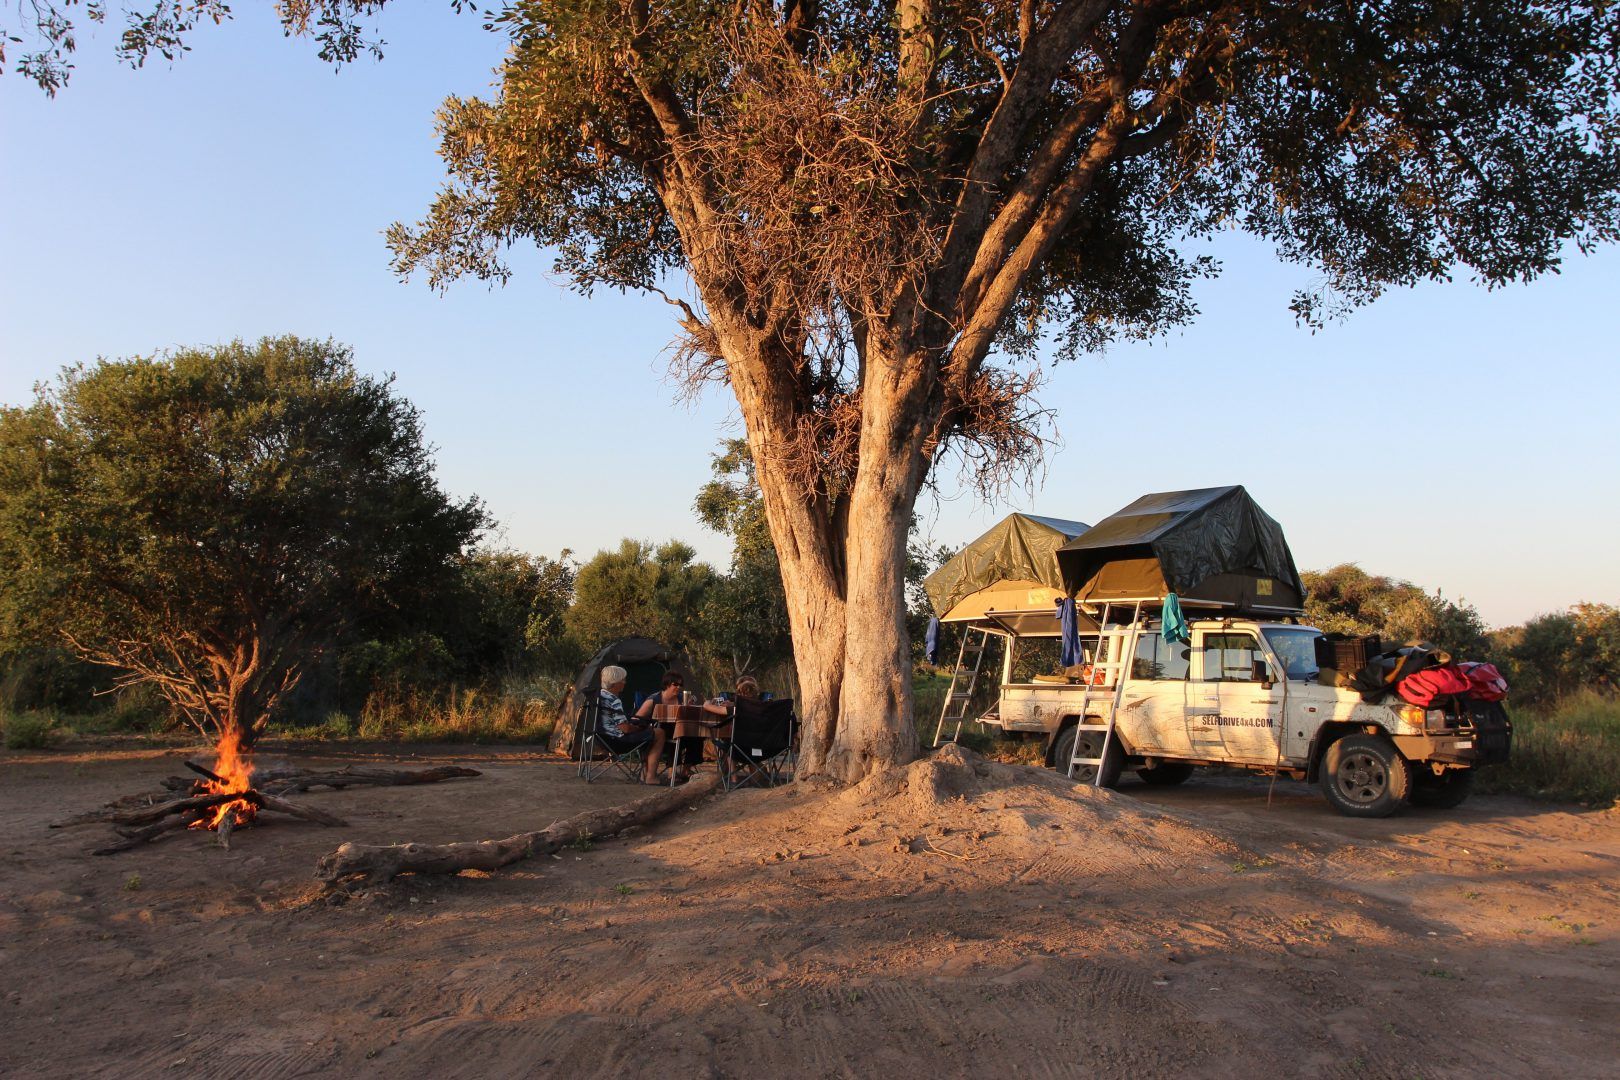 A road trip through Africa in 9 weeks